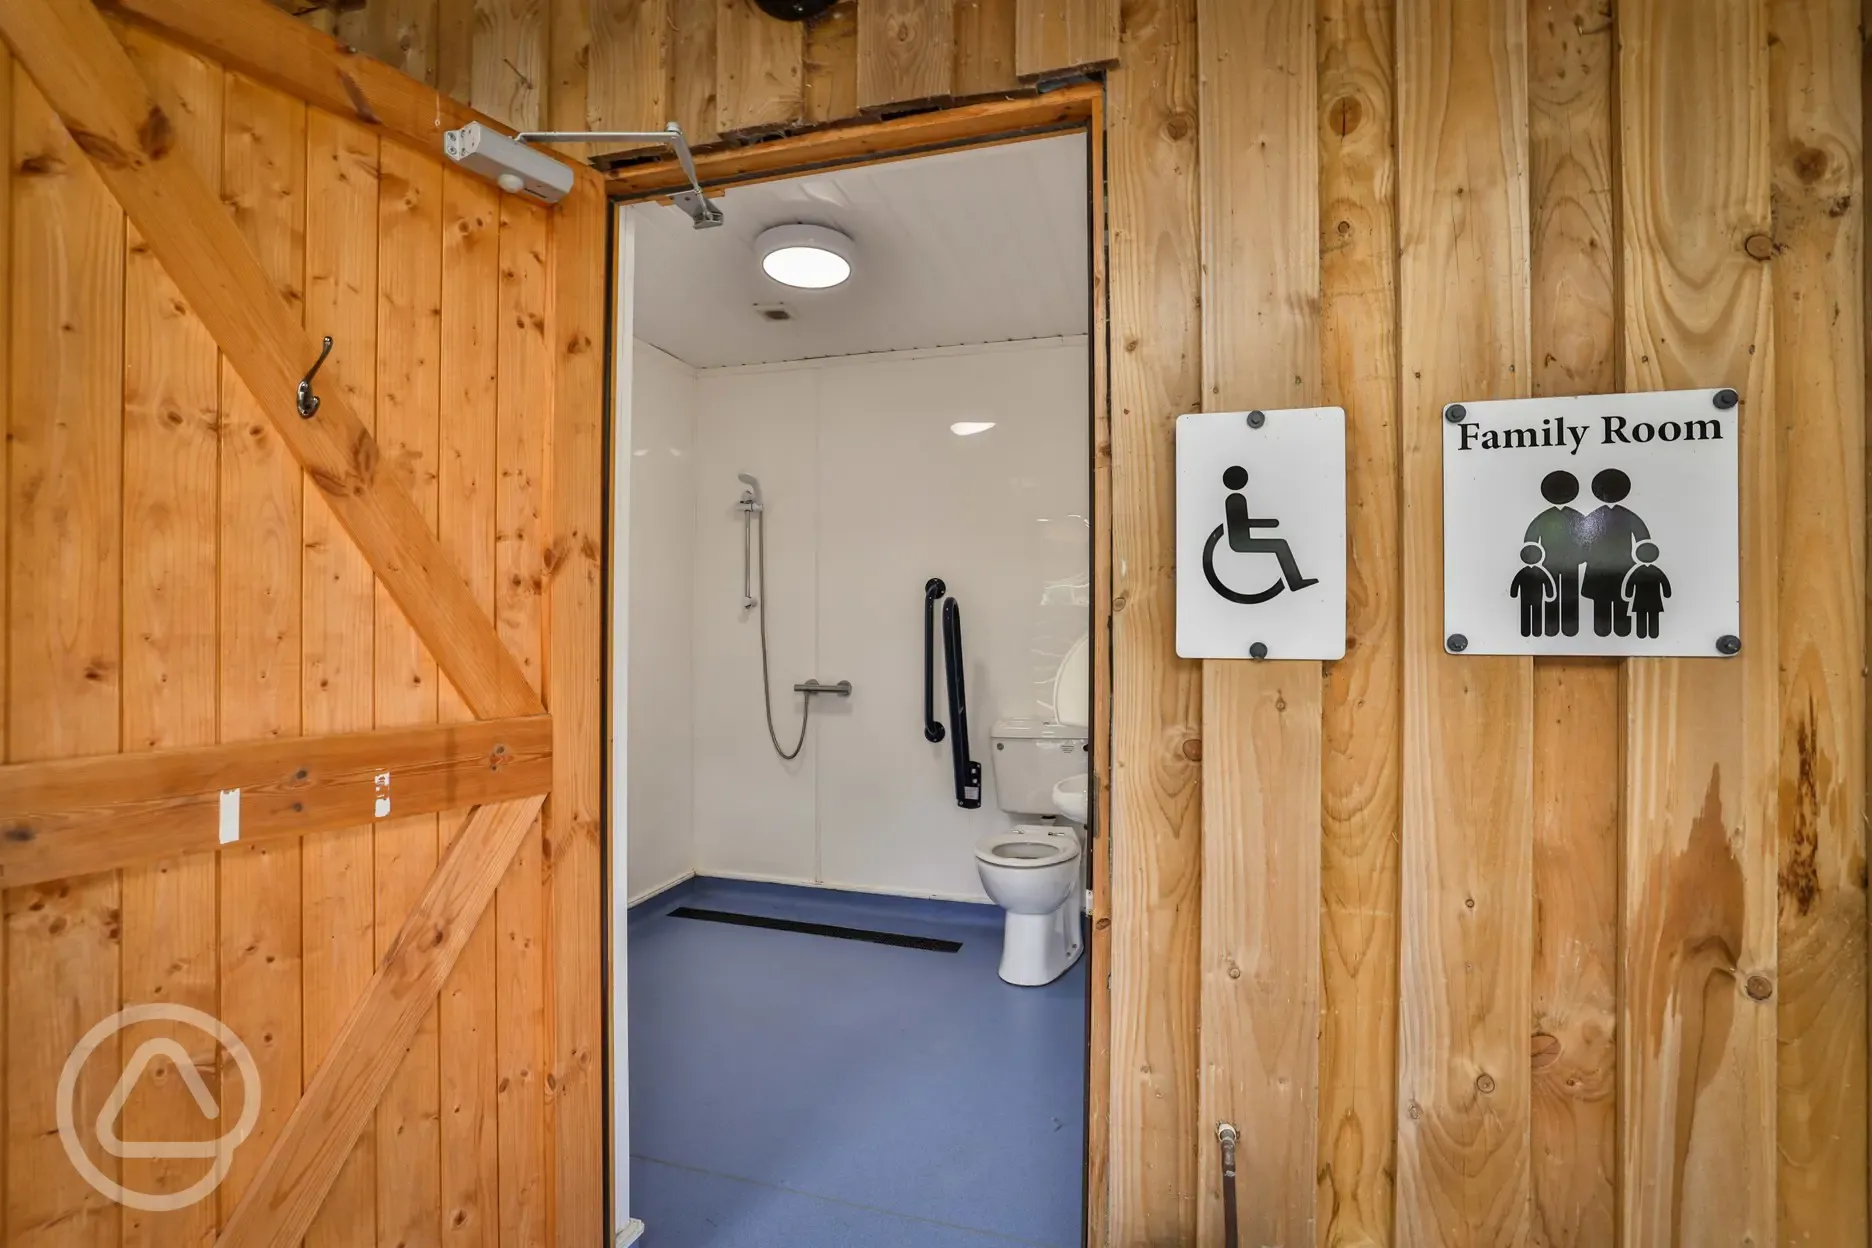 Disabled toilet facility